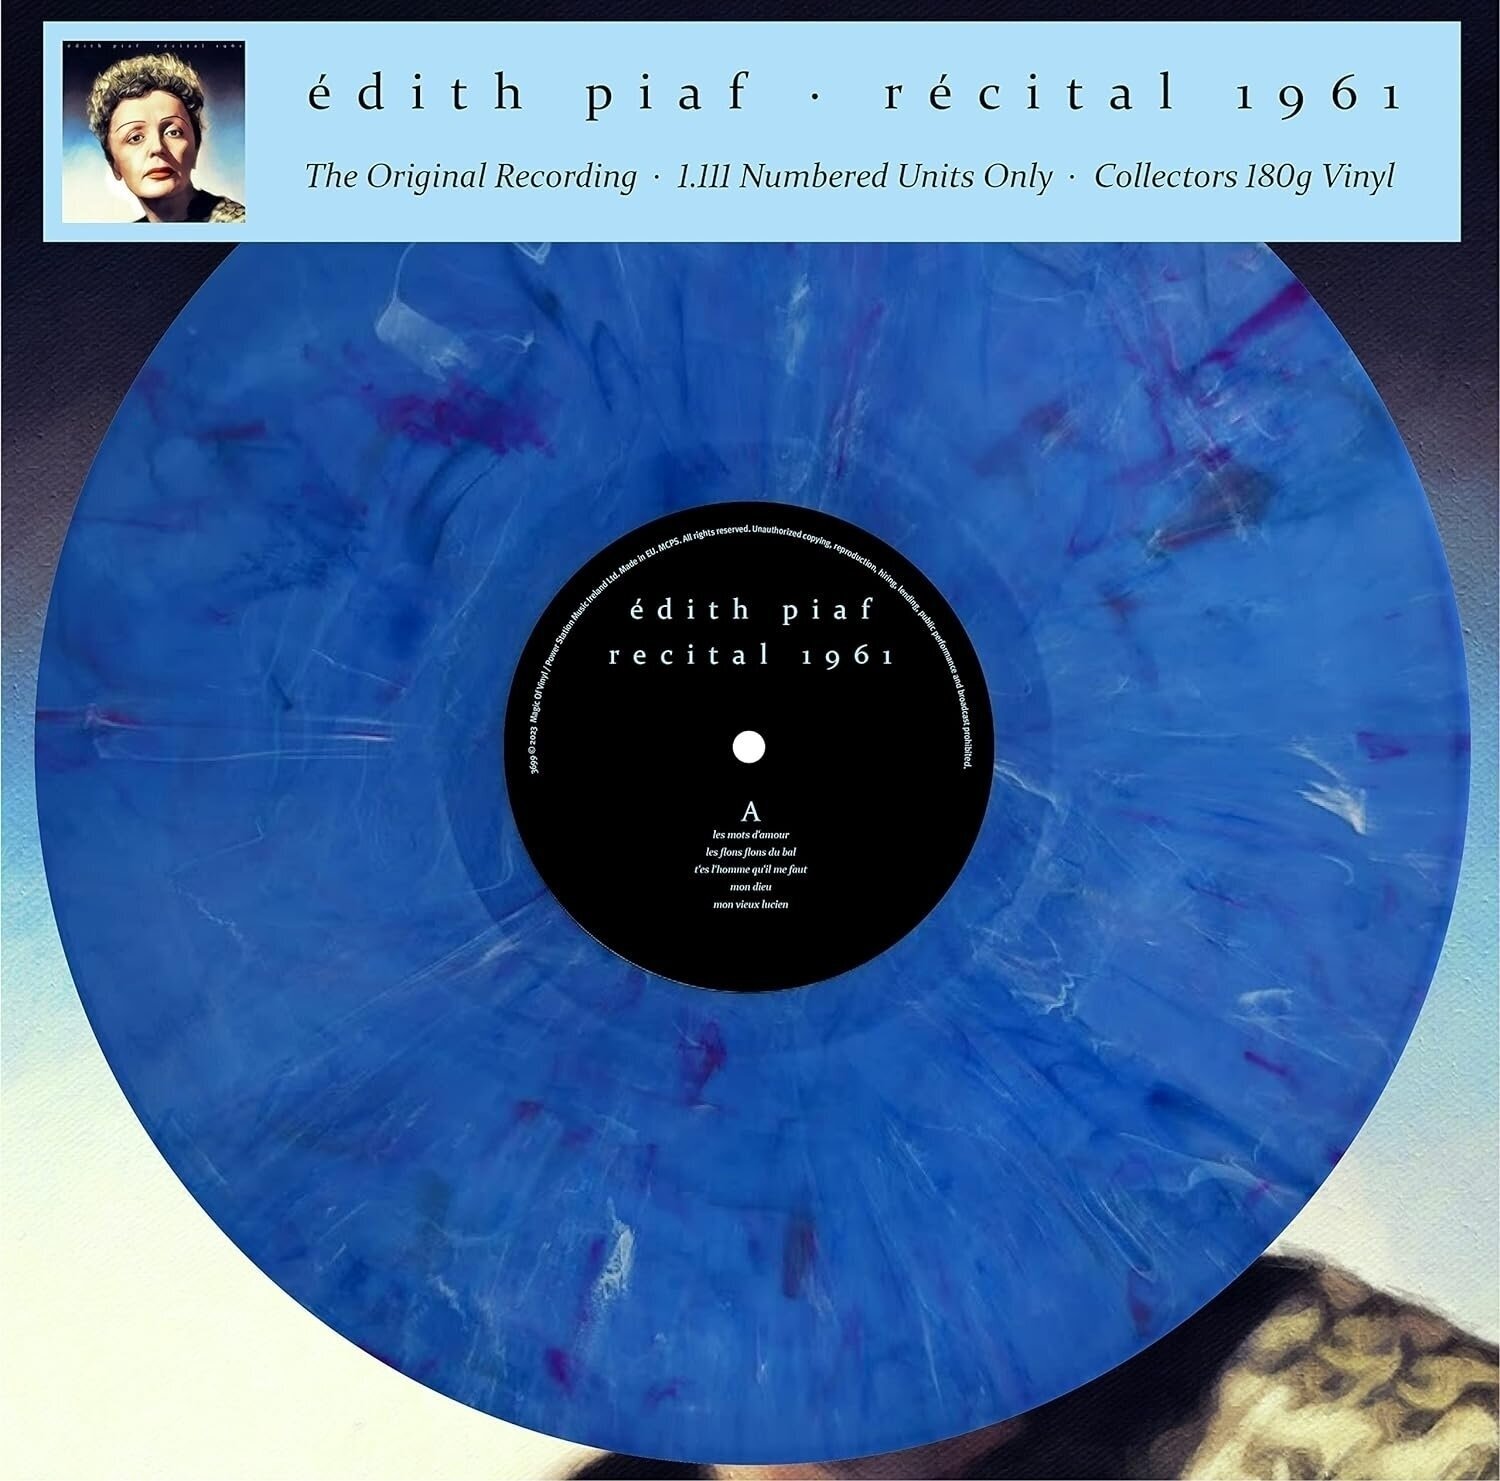 Edith Piaf - Récital 1961 (Limited Edition) (Numbered) (Reissue) (Blue Marbled Coloured) (LP) Edith Piaf